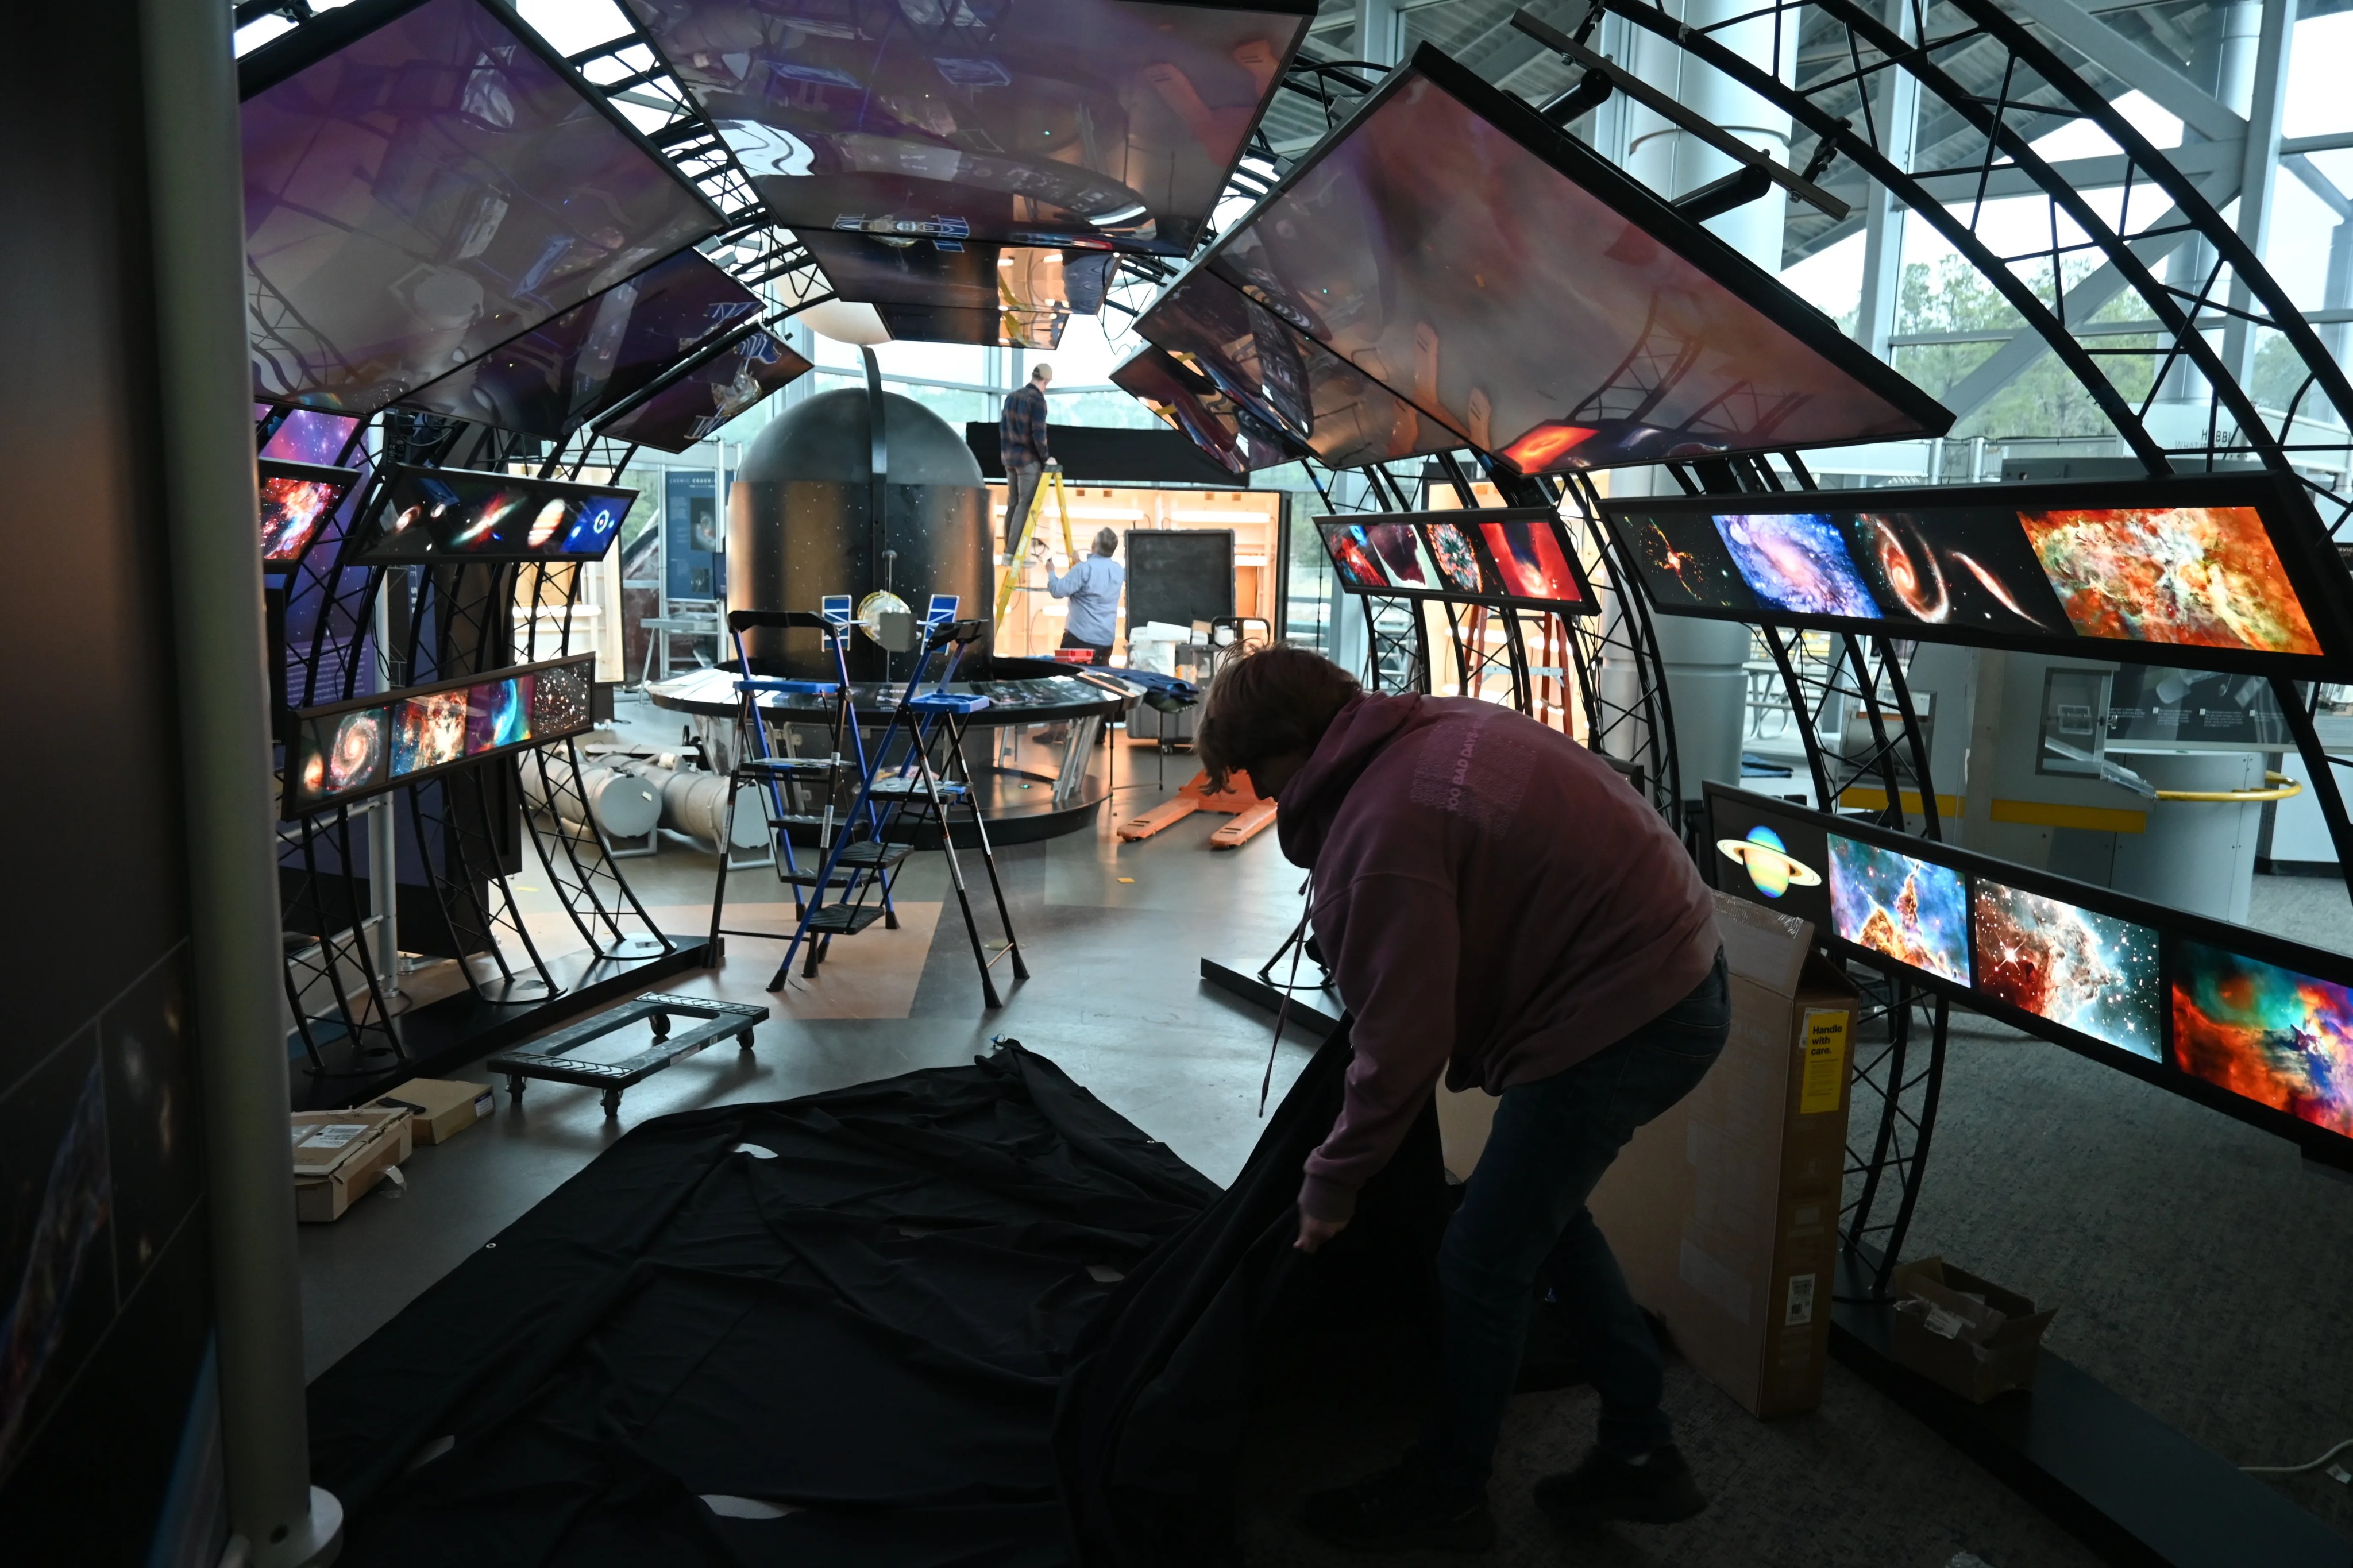 Several workers are seen assembling the Hubble traveling exhibit as various stations are in different states of completion.